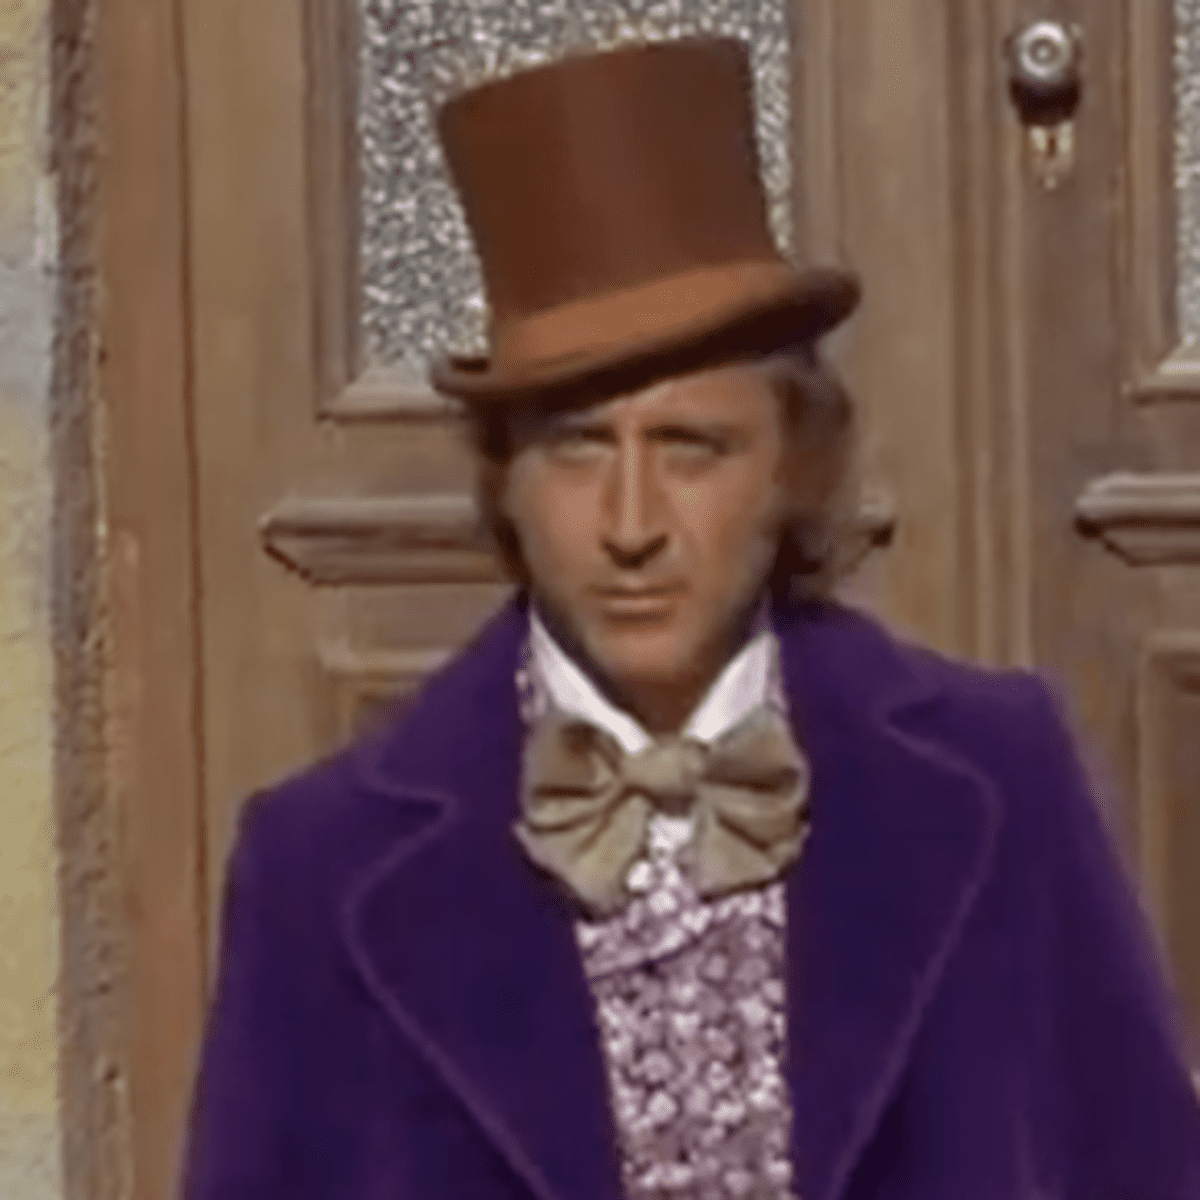 willy wonka tell me more gif